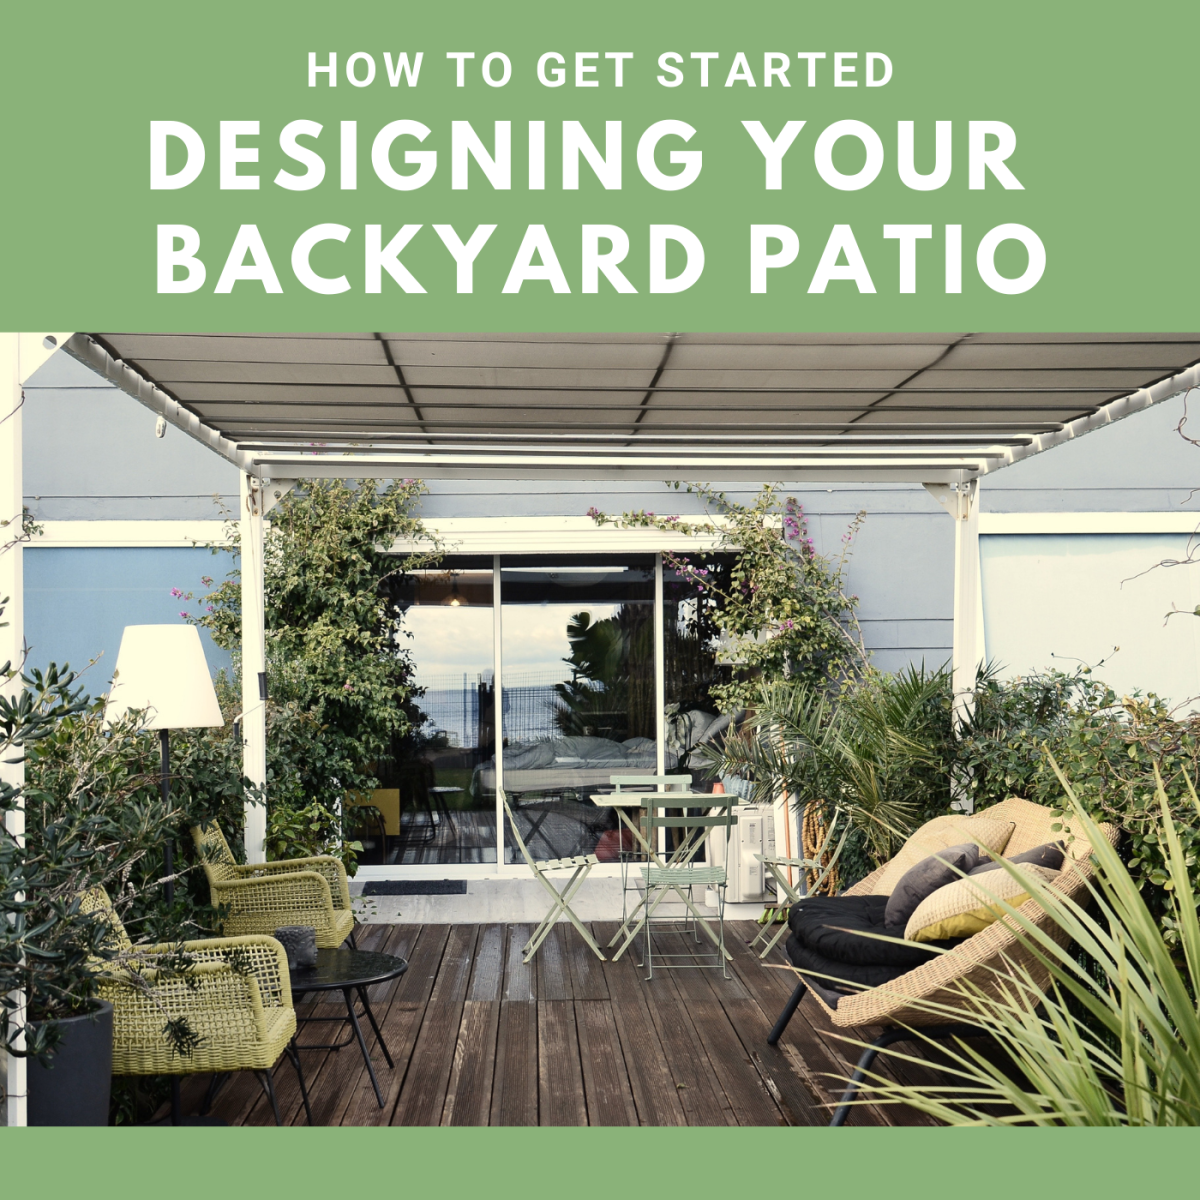 How to Get Started Designing Your Backyard Patio